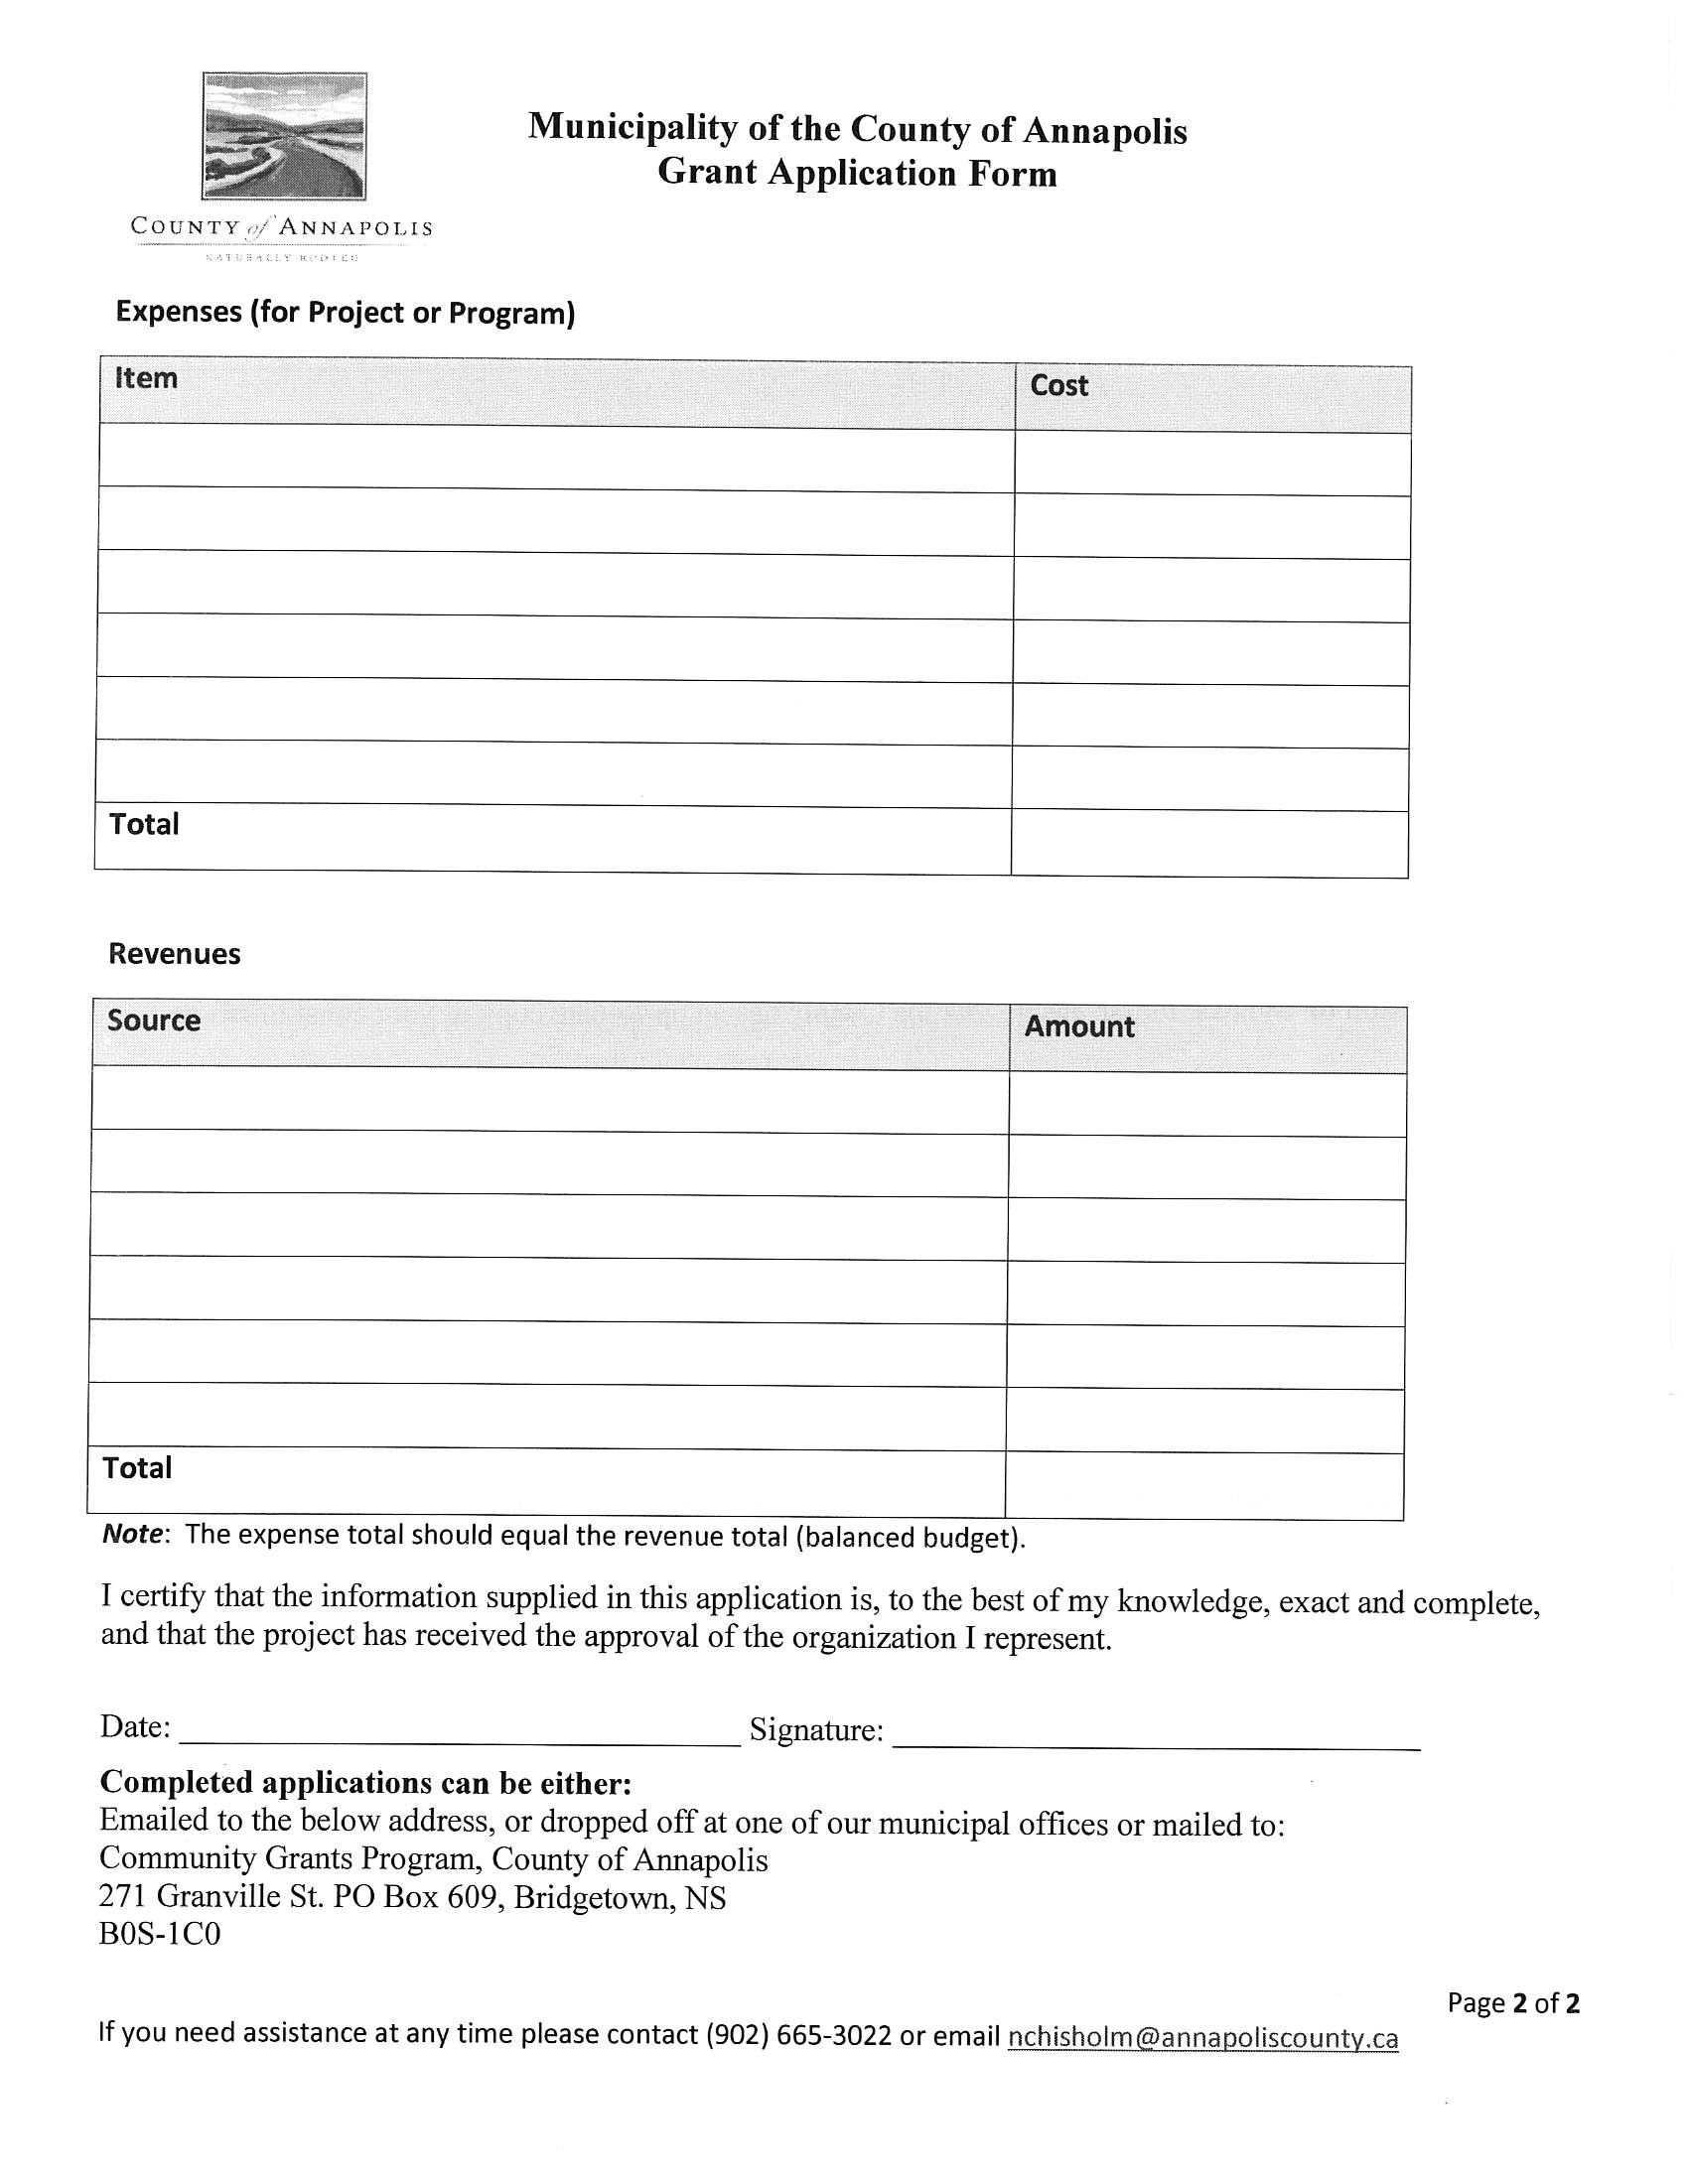 Grant Application page 2